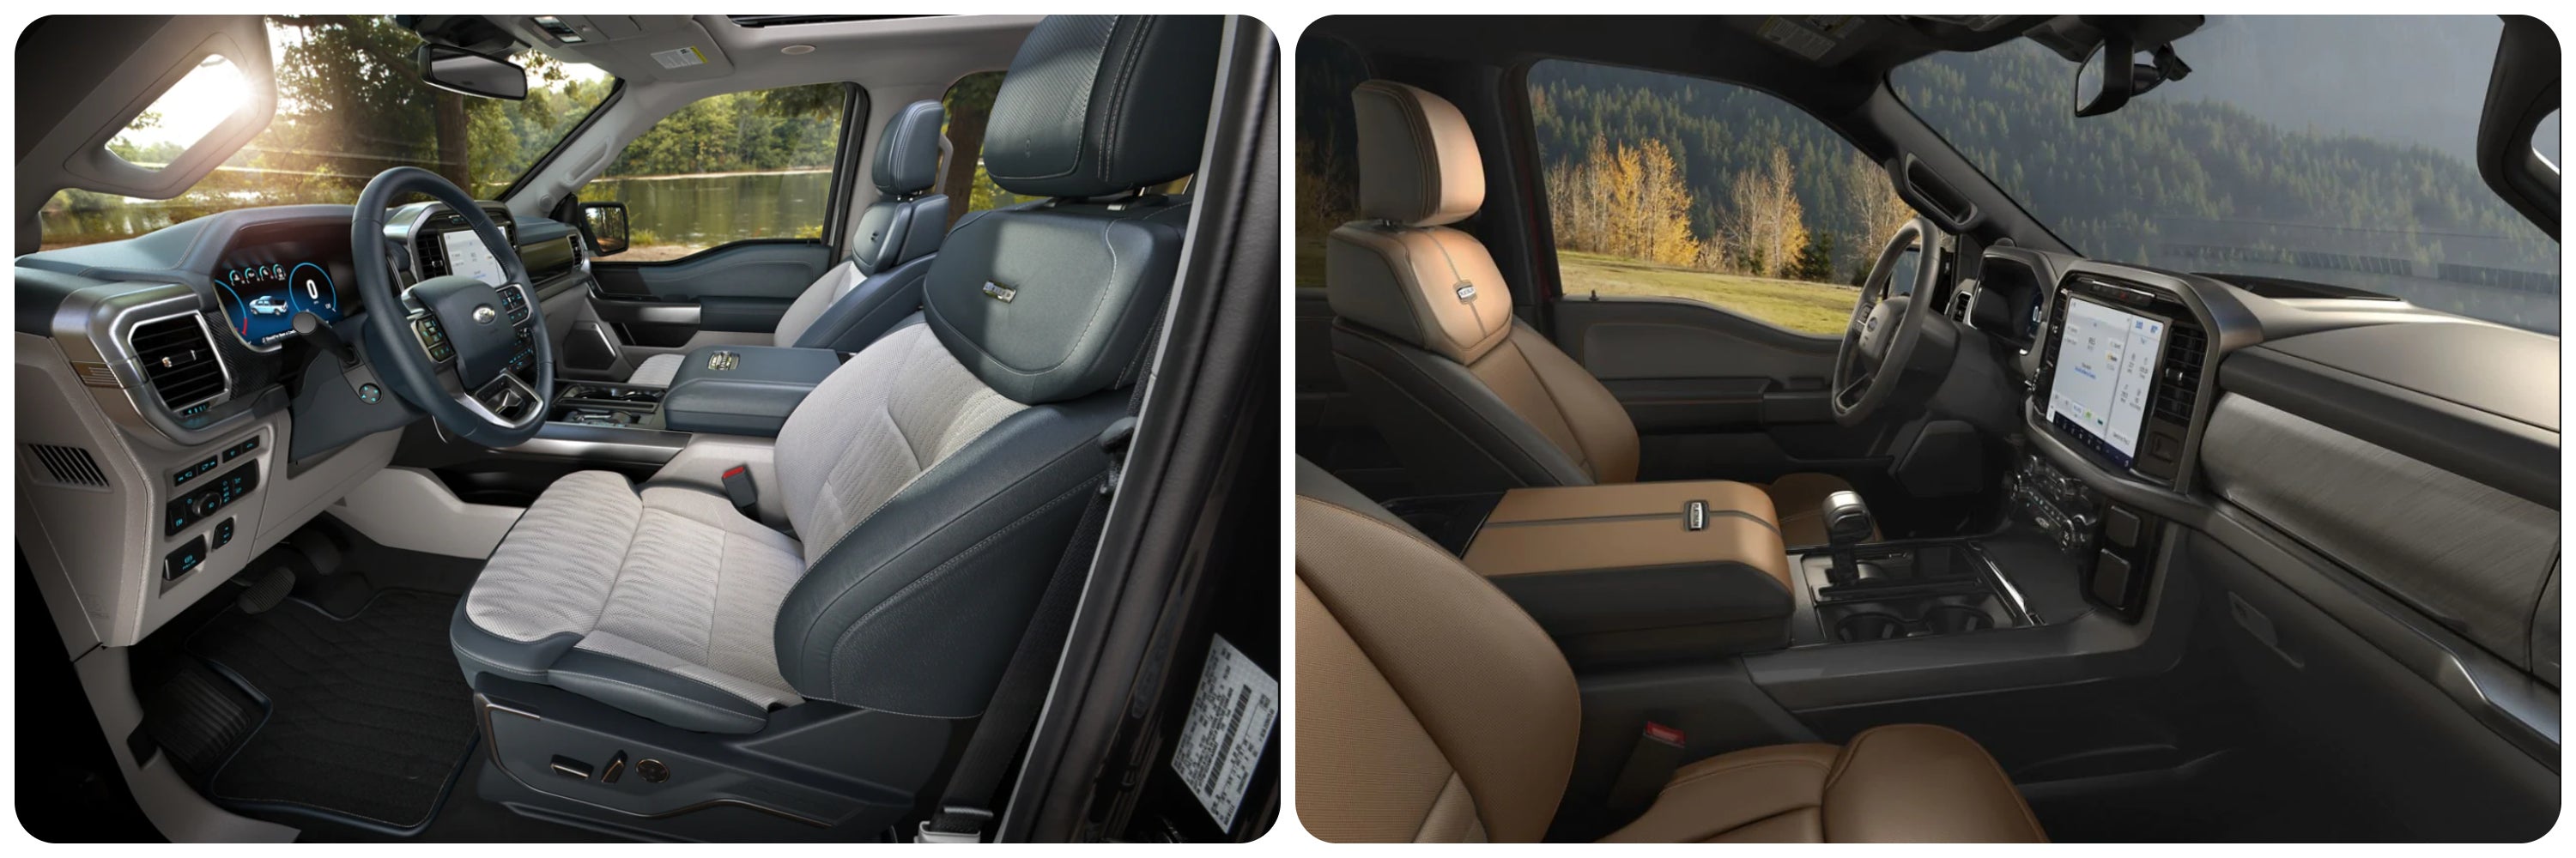 On the left is a view of the interior seating in gray cloth and leather of the 2022 Ford F-150 and on the right a two-toned brown leather interior of a King Ranch 2021 Ford F150